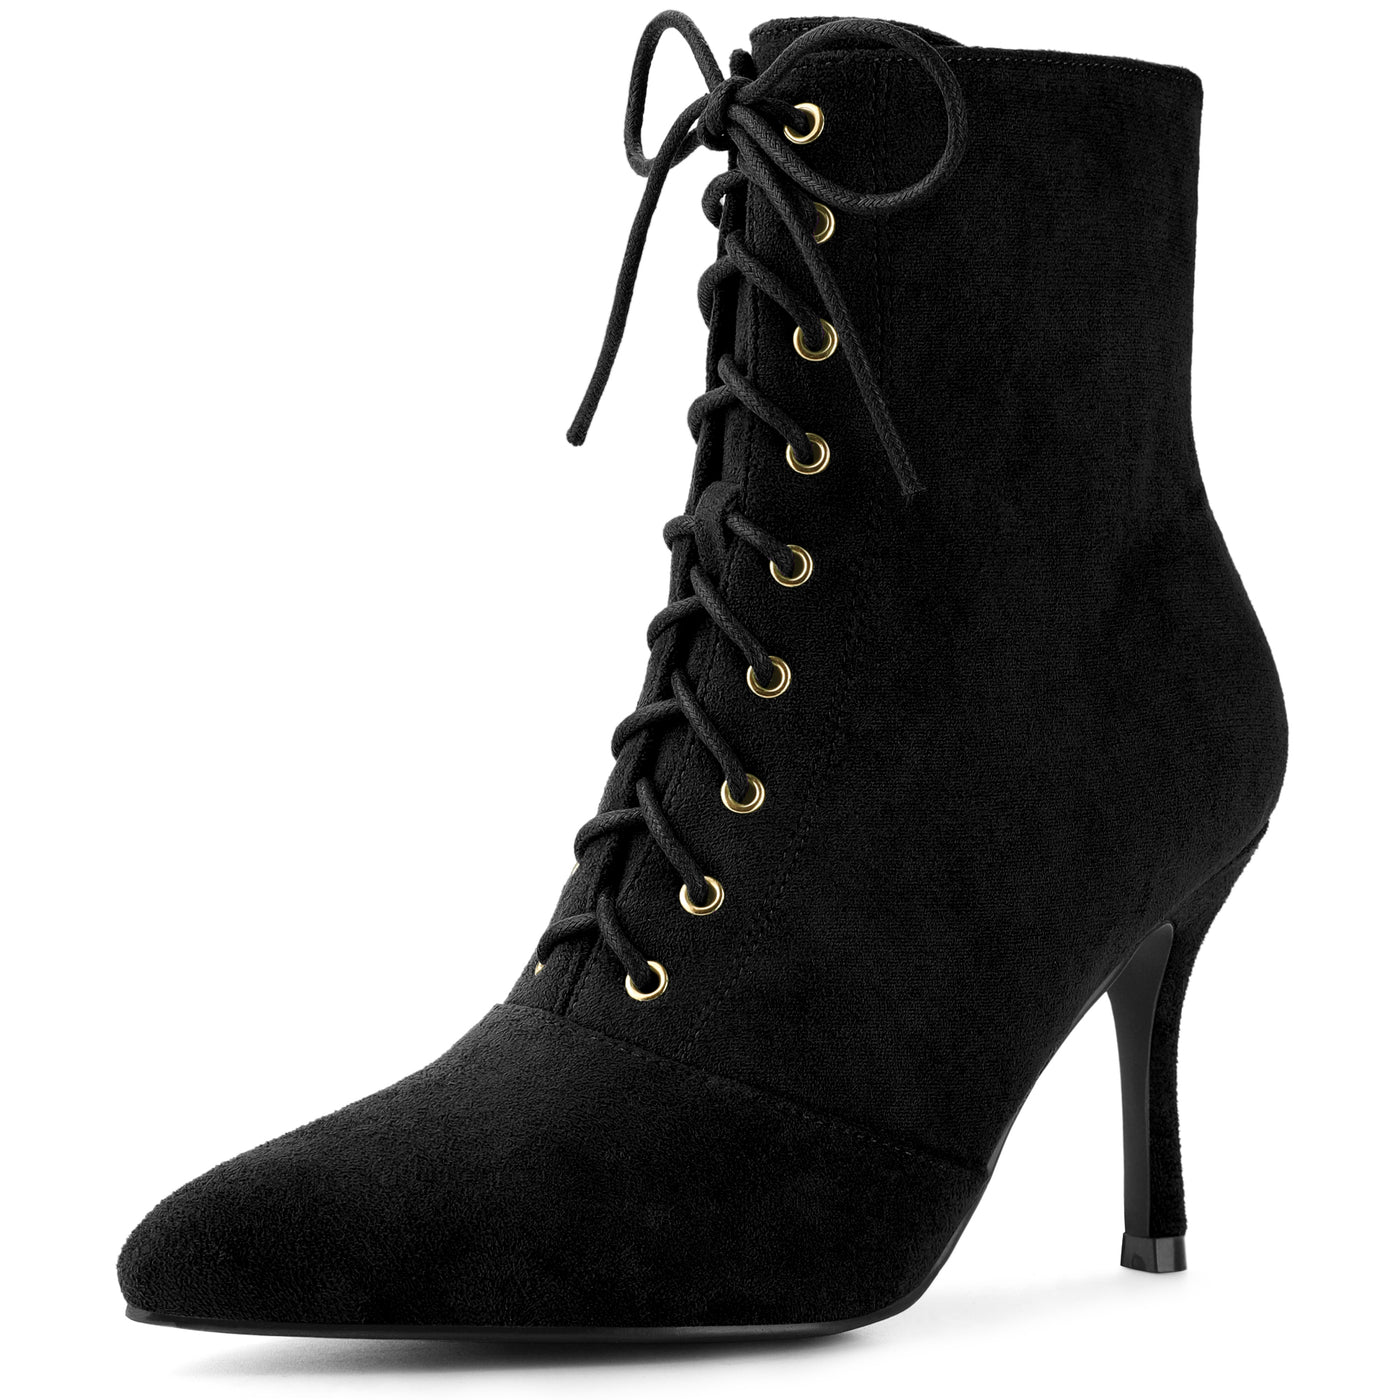 Allegra K Pointy Toe Lace Up Side Zip Stiletto Heel Ankle Boots